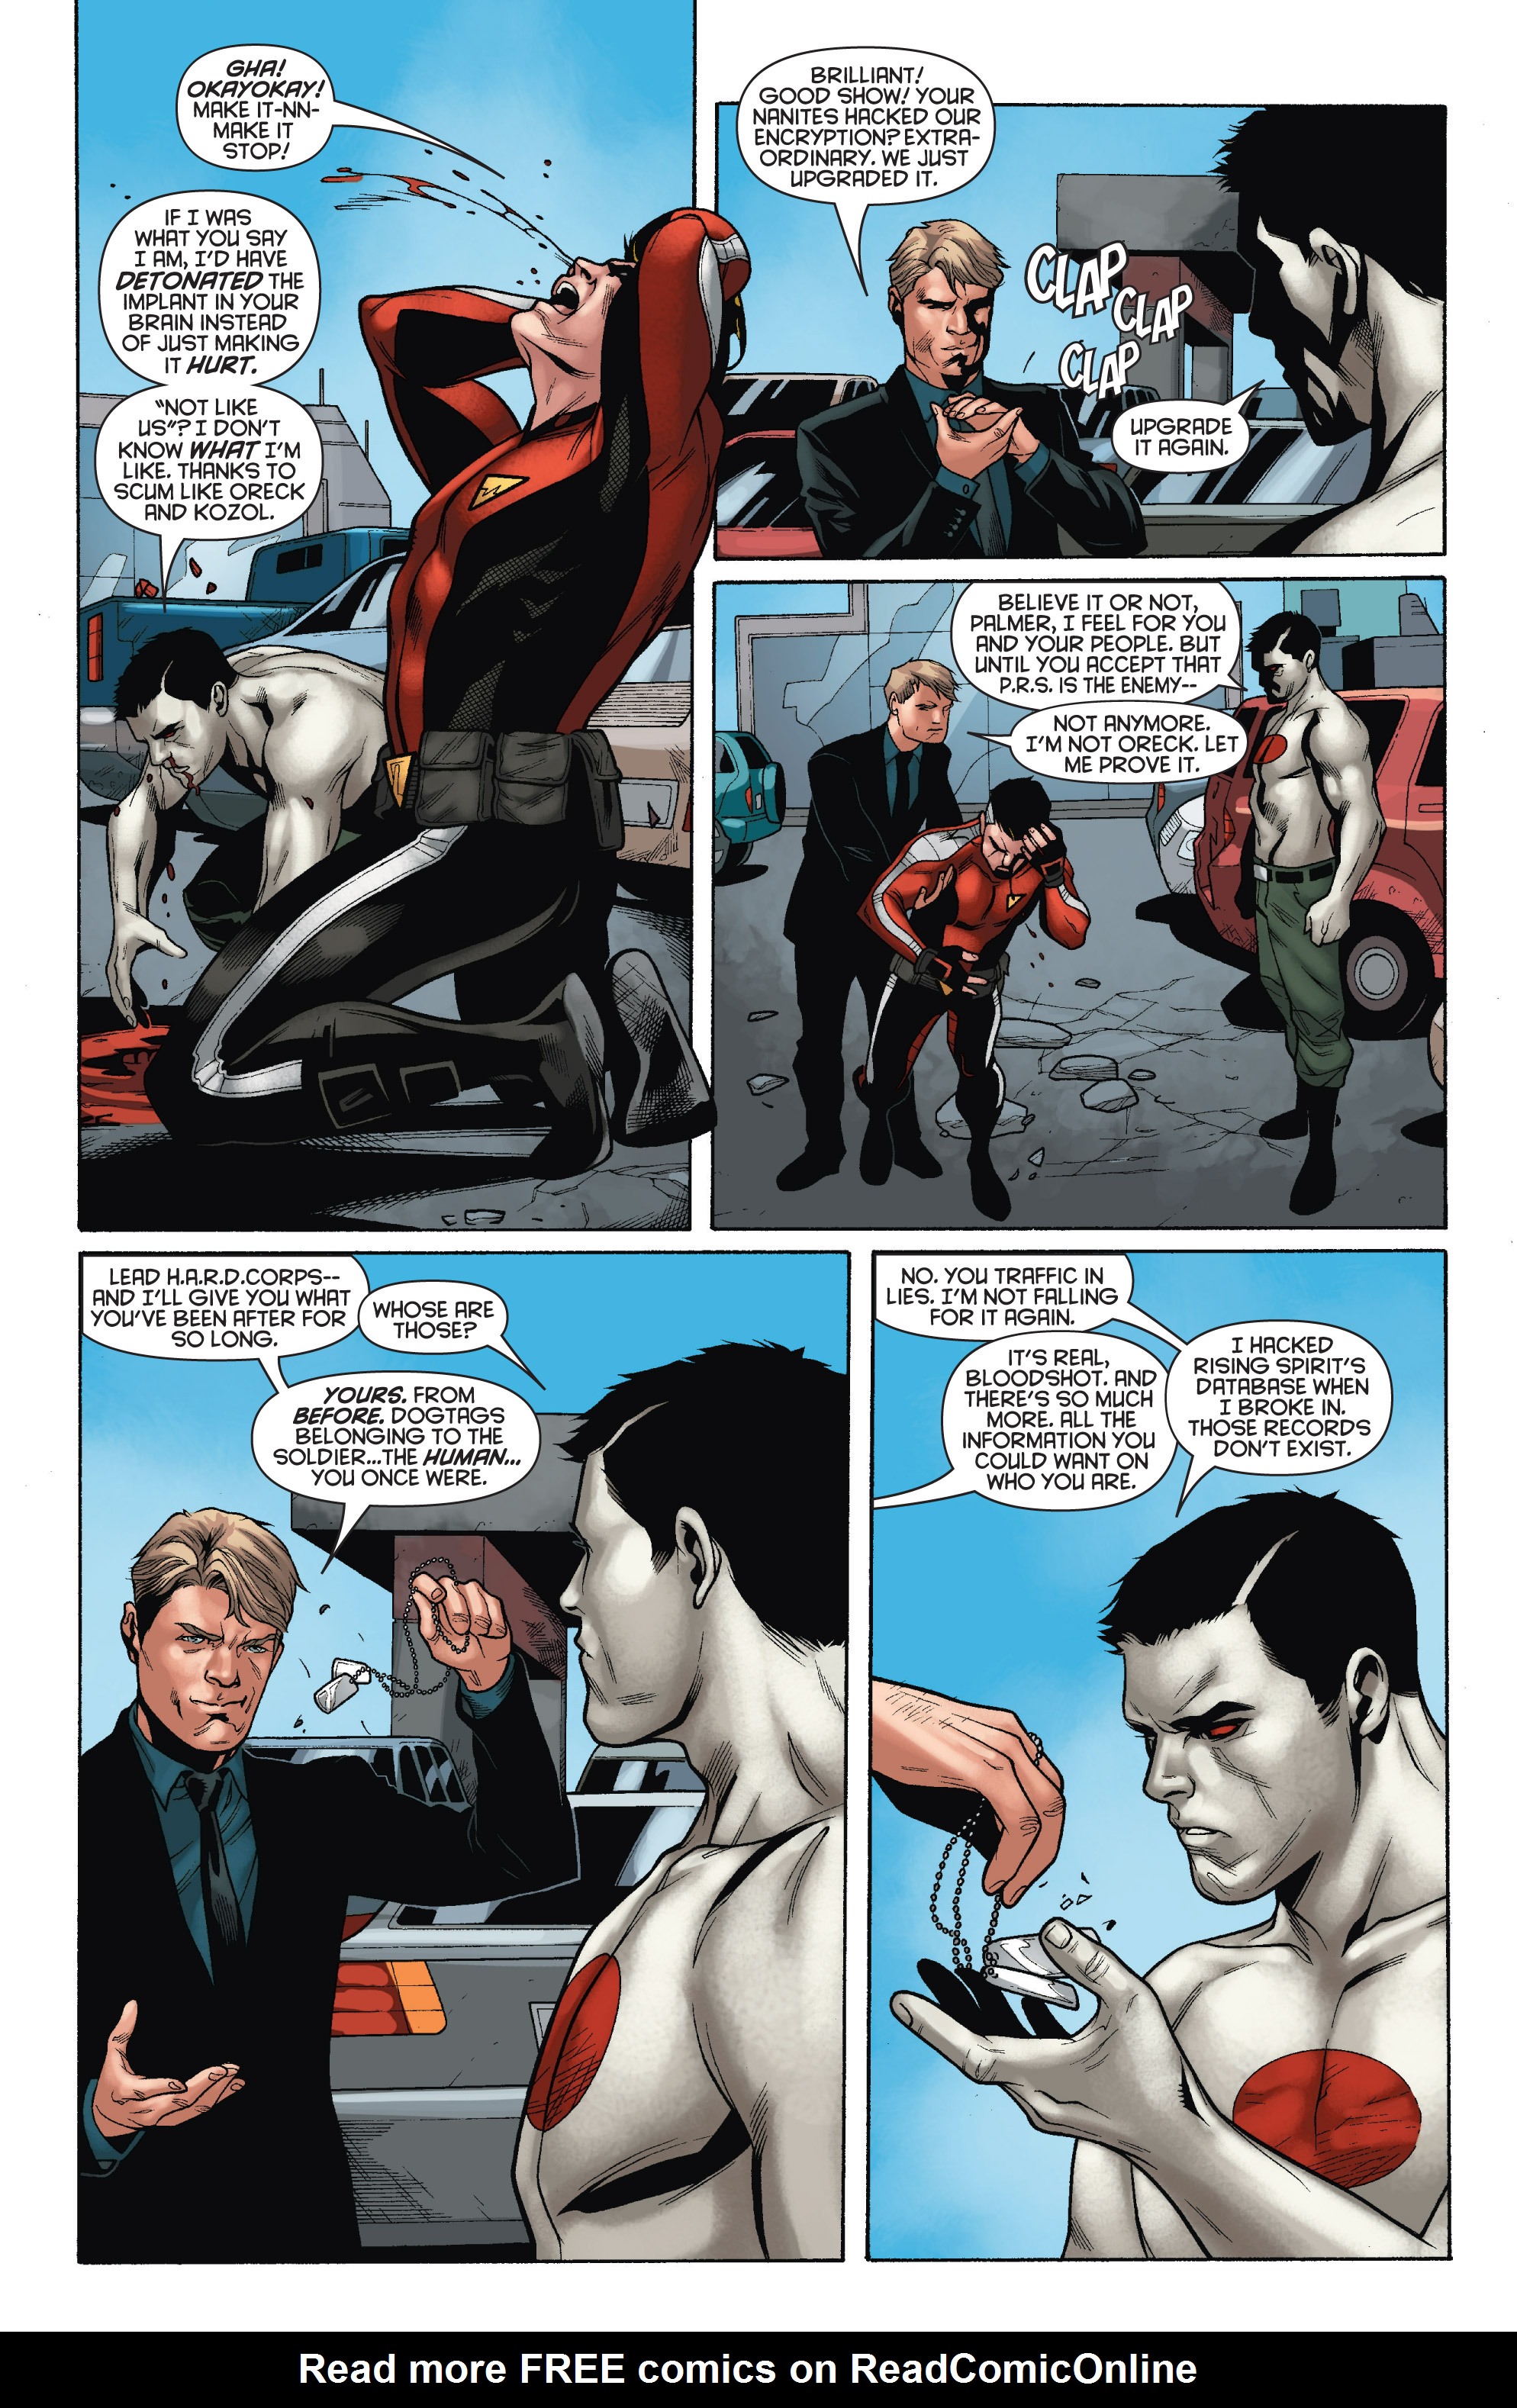 Read online Bloodshot and H.A.R.D.Corps comic -  Issue # TPB 4 - 48